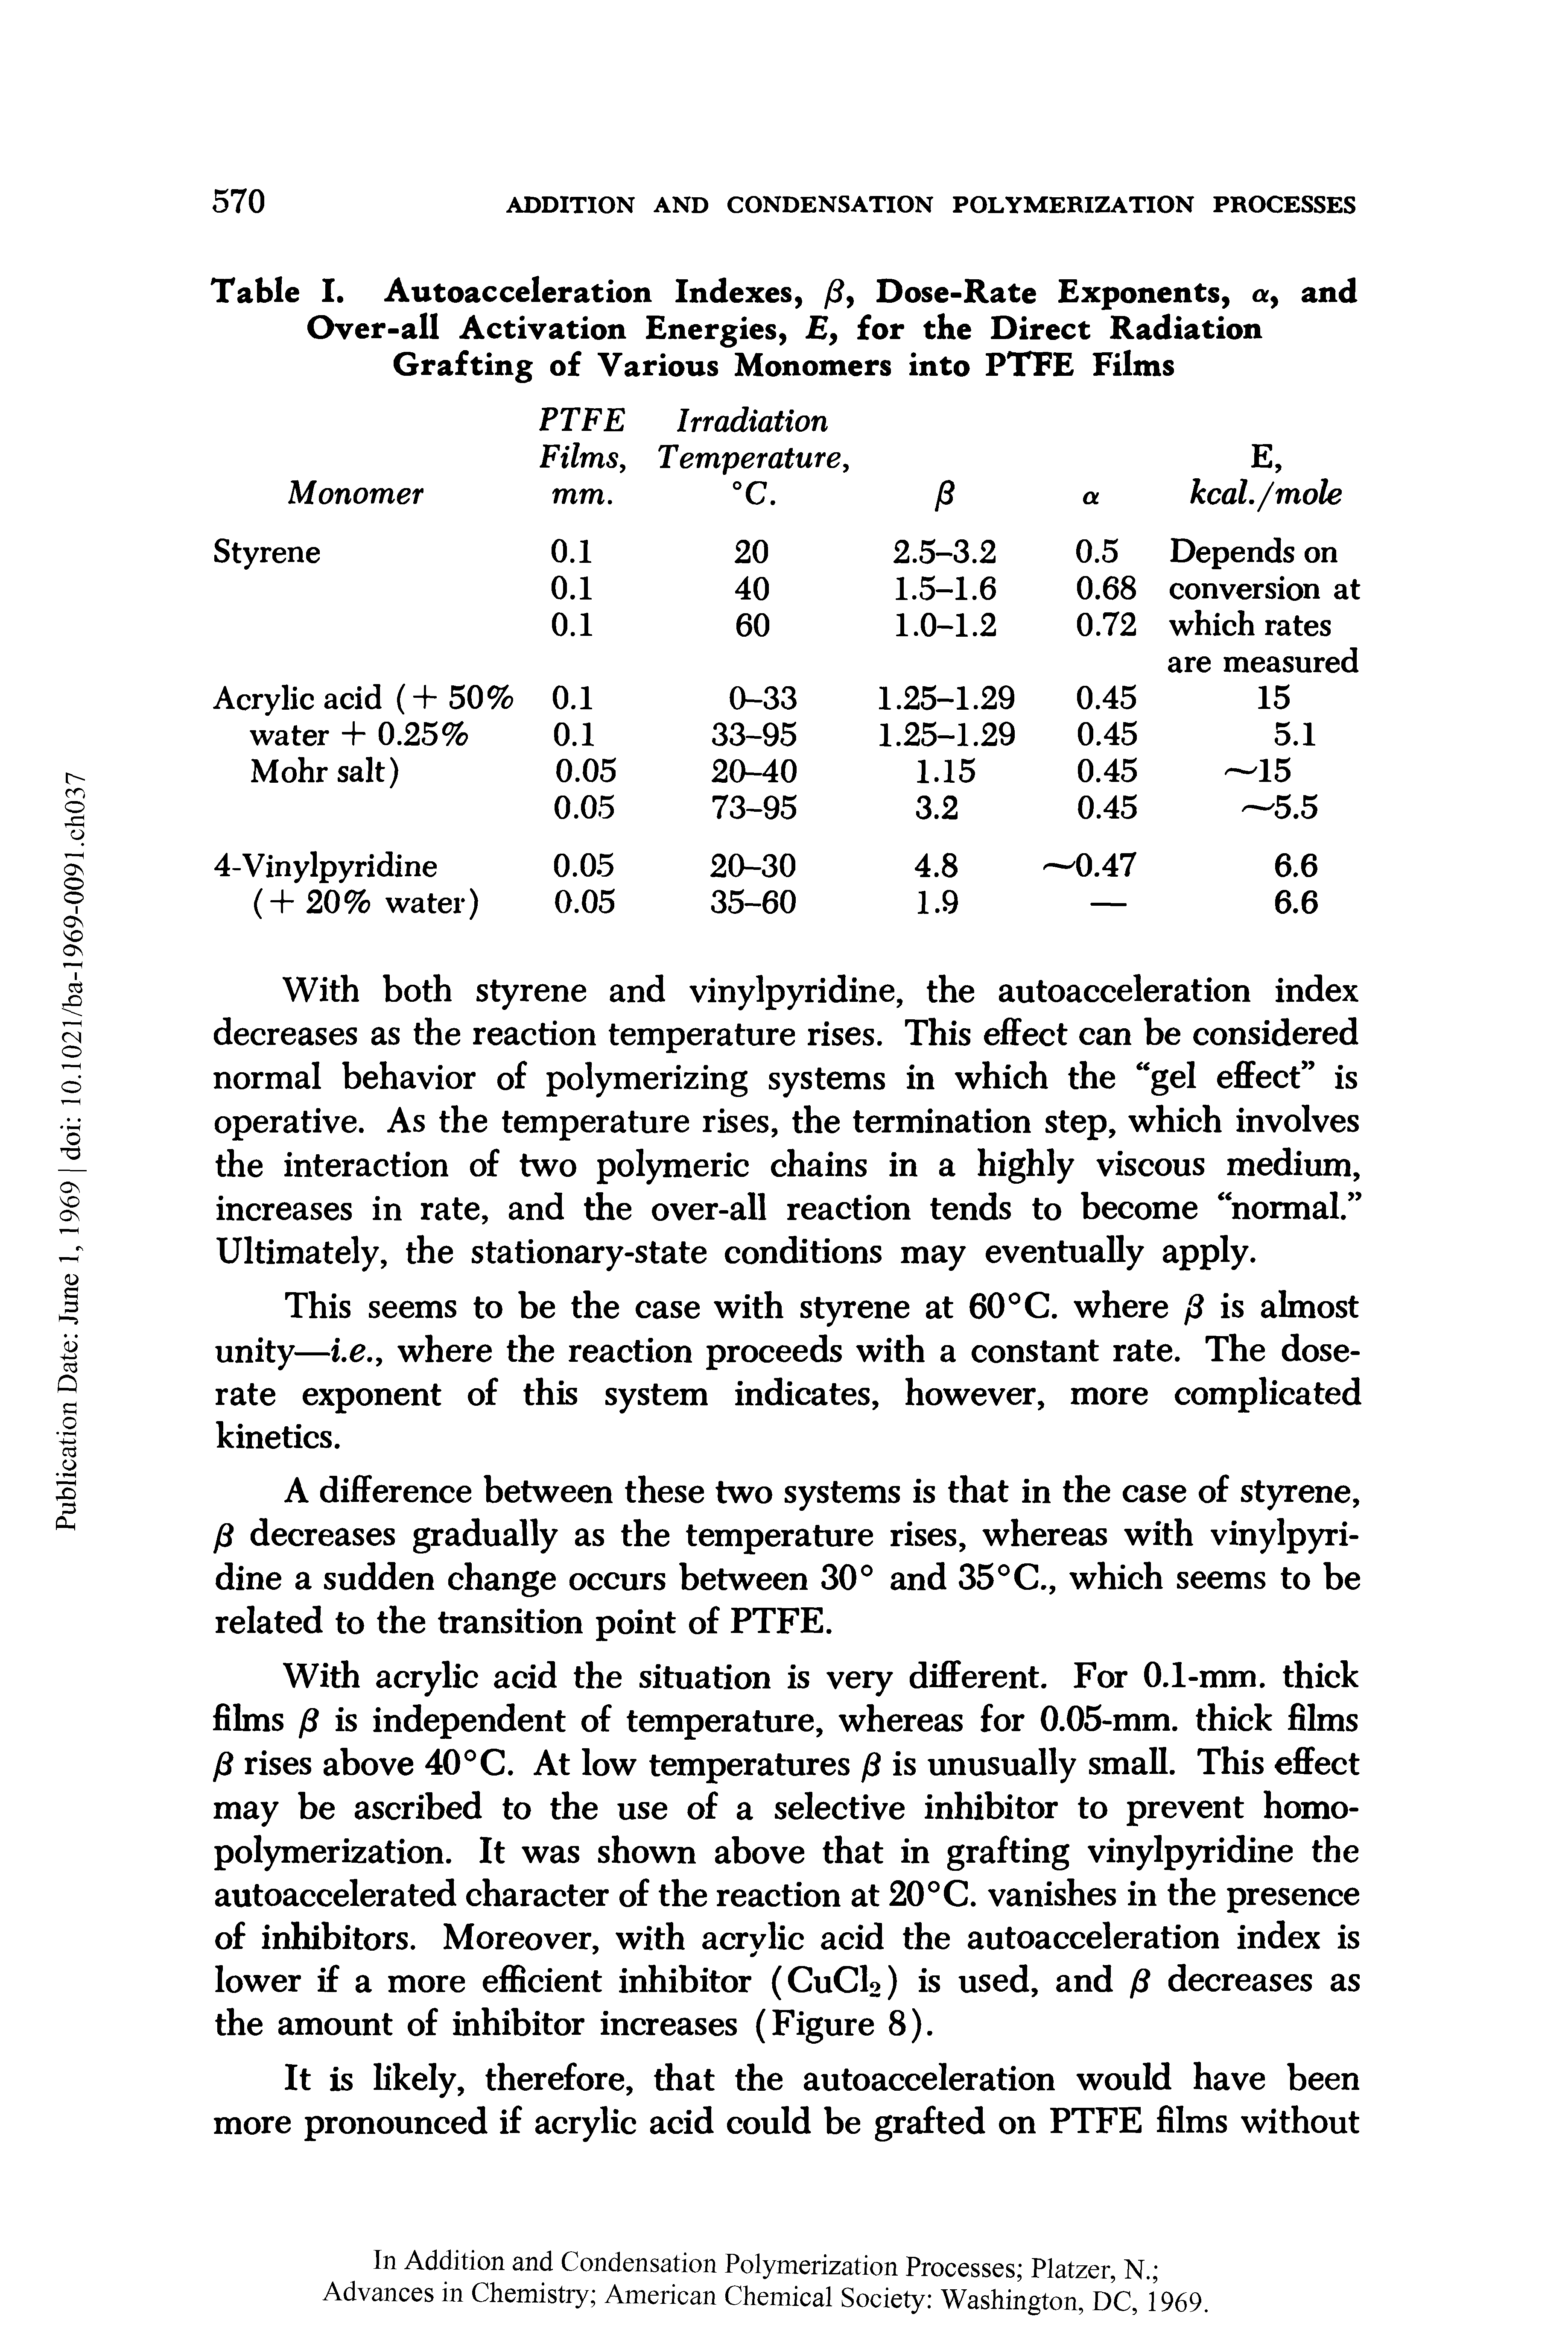 Table I. Autoacceleration Indexes, / , Dose-Rate Exponents, a, and Over-all Activation Energies, , for the Direct Radiation Grafting of Various Monomers into PTFE Films...